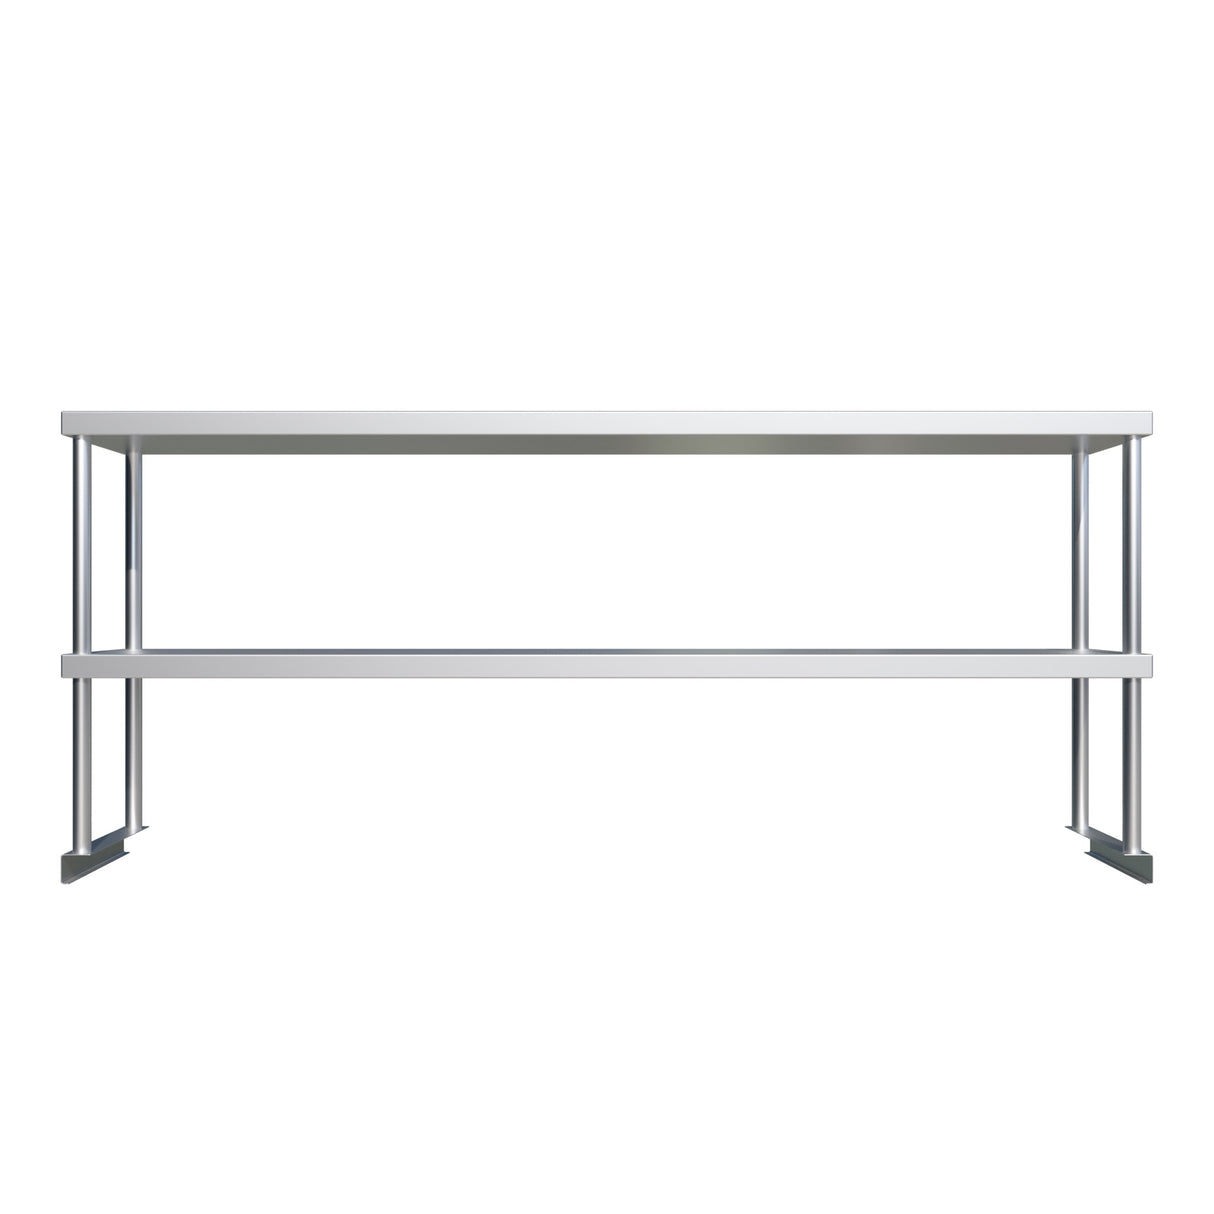 Empire Stainless Steel Double Over Shelf 1500mm Wide - OSD-1500